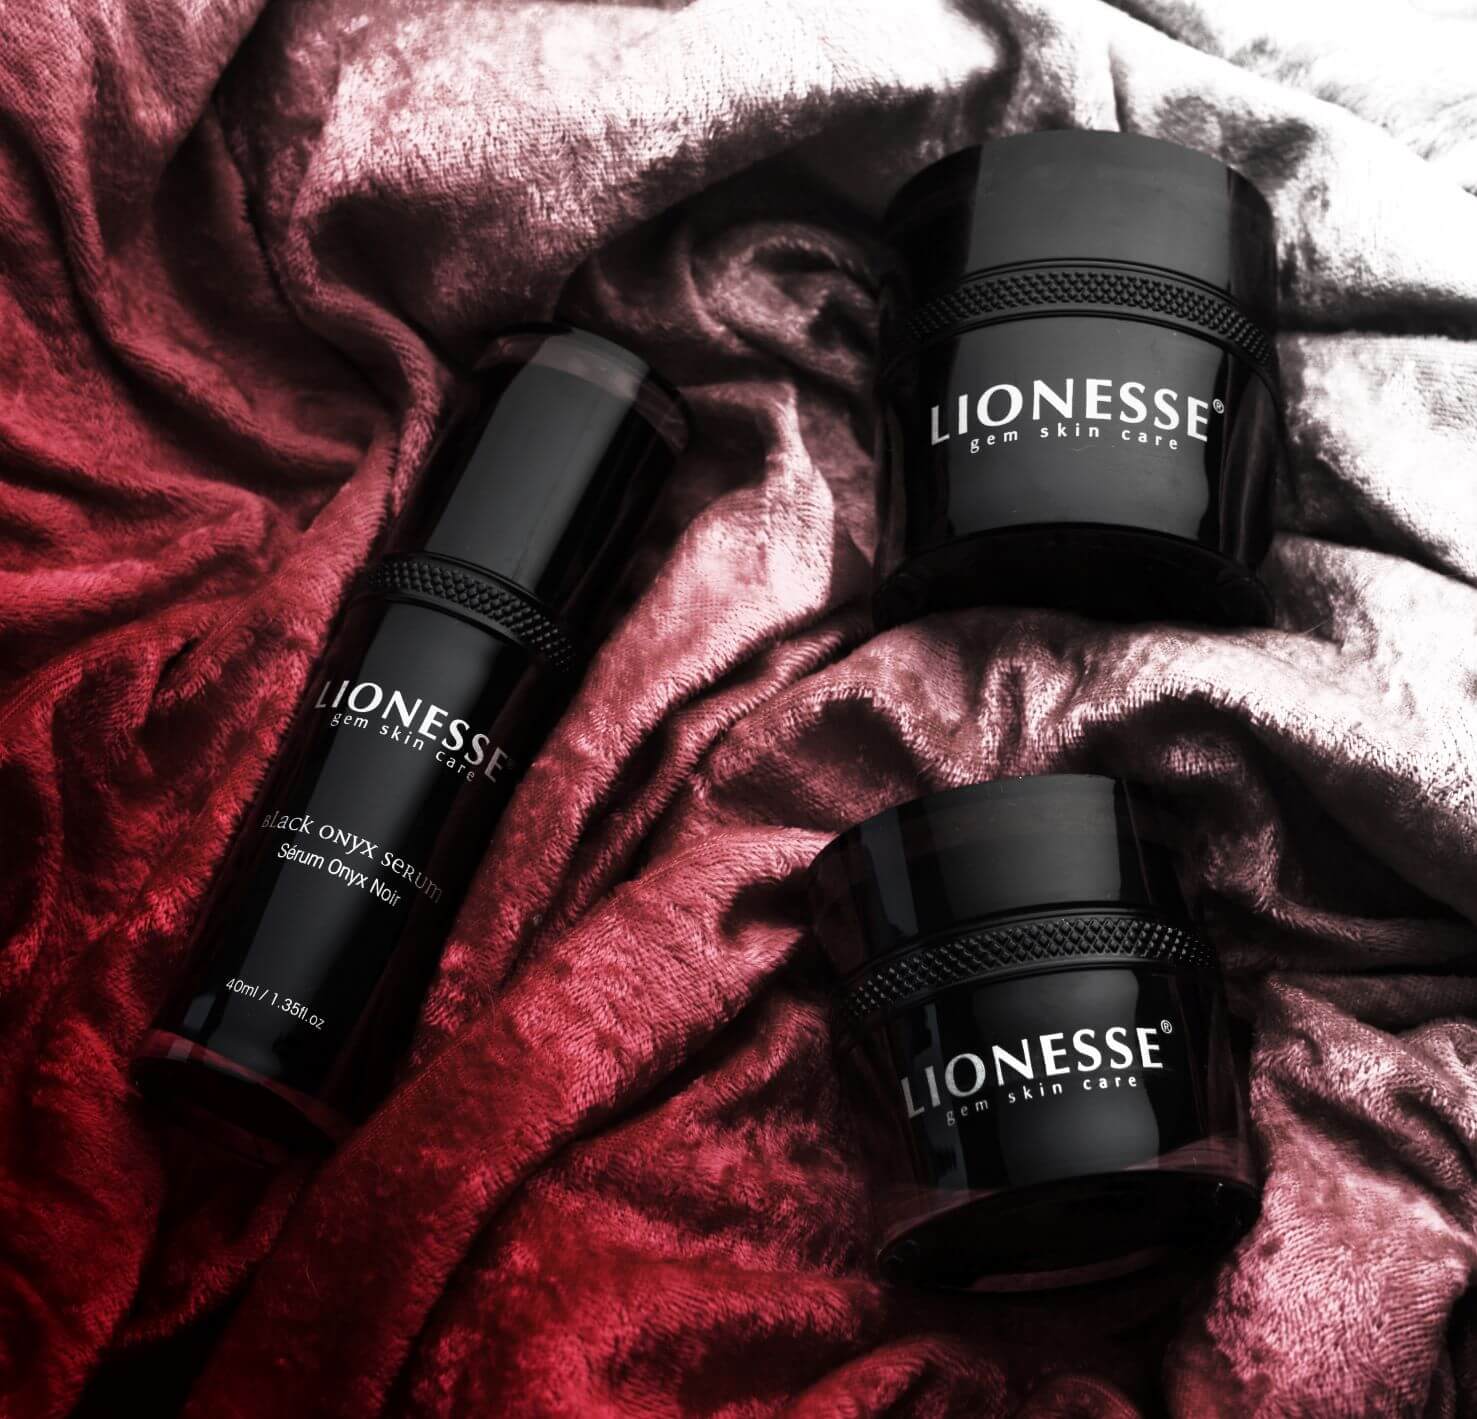 lionesse black onyx collection